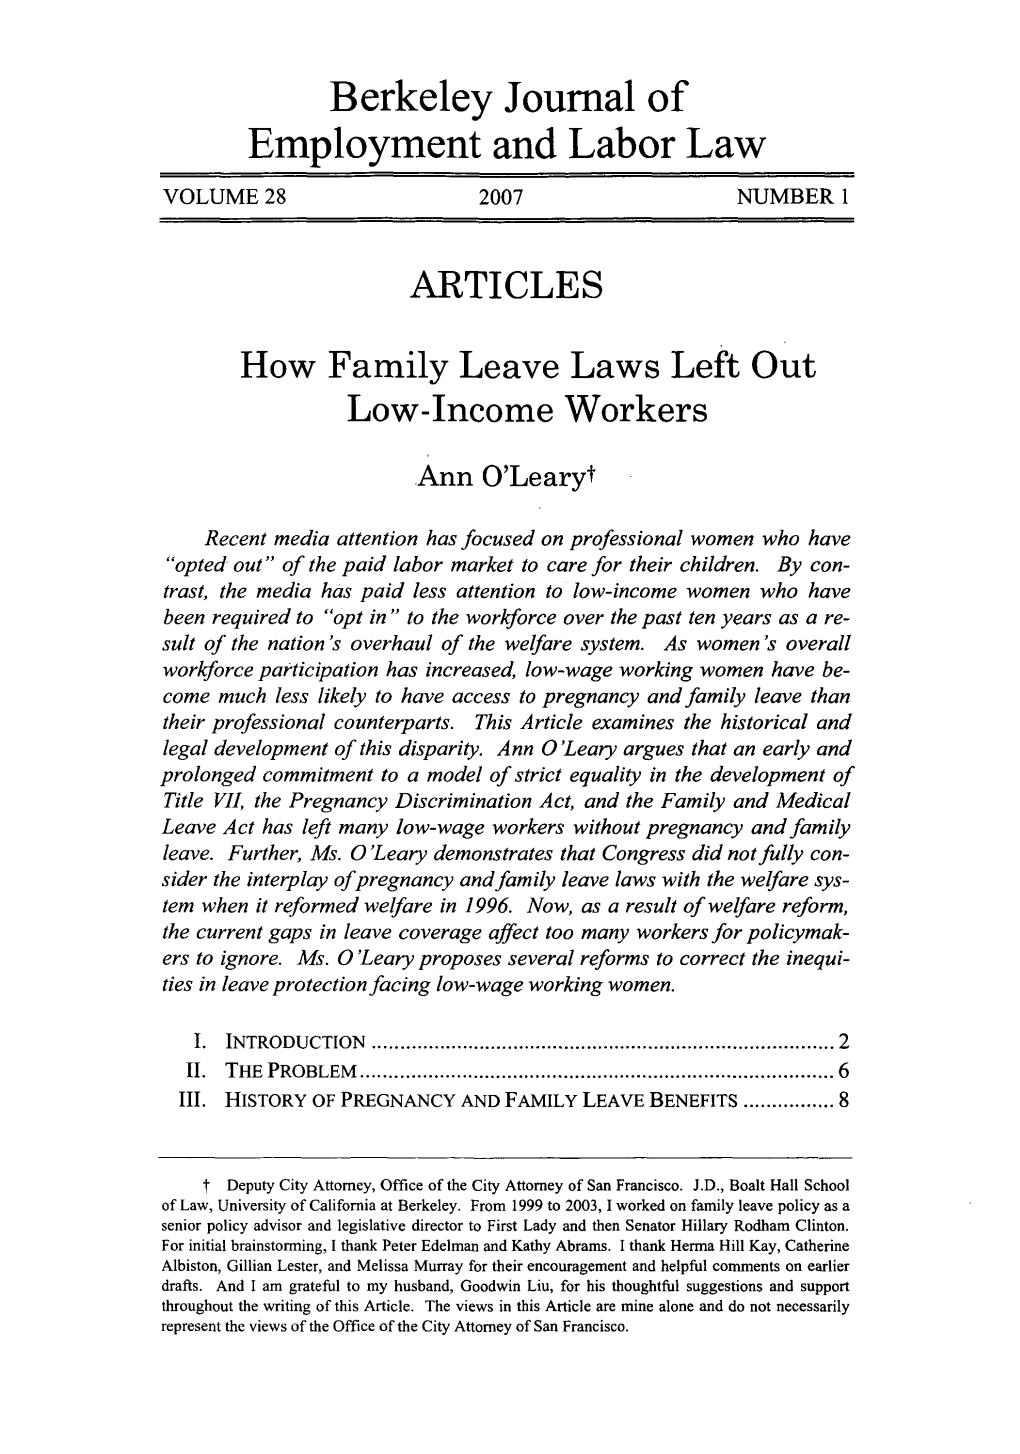 How Family Leaves Laws Left out Low-Income Workers